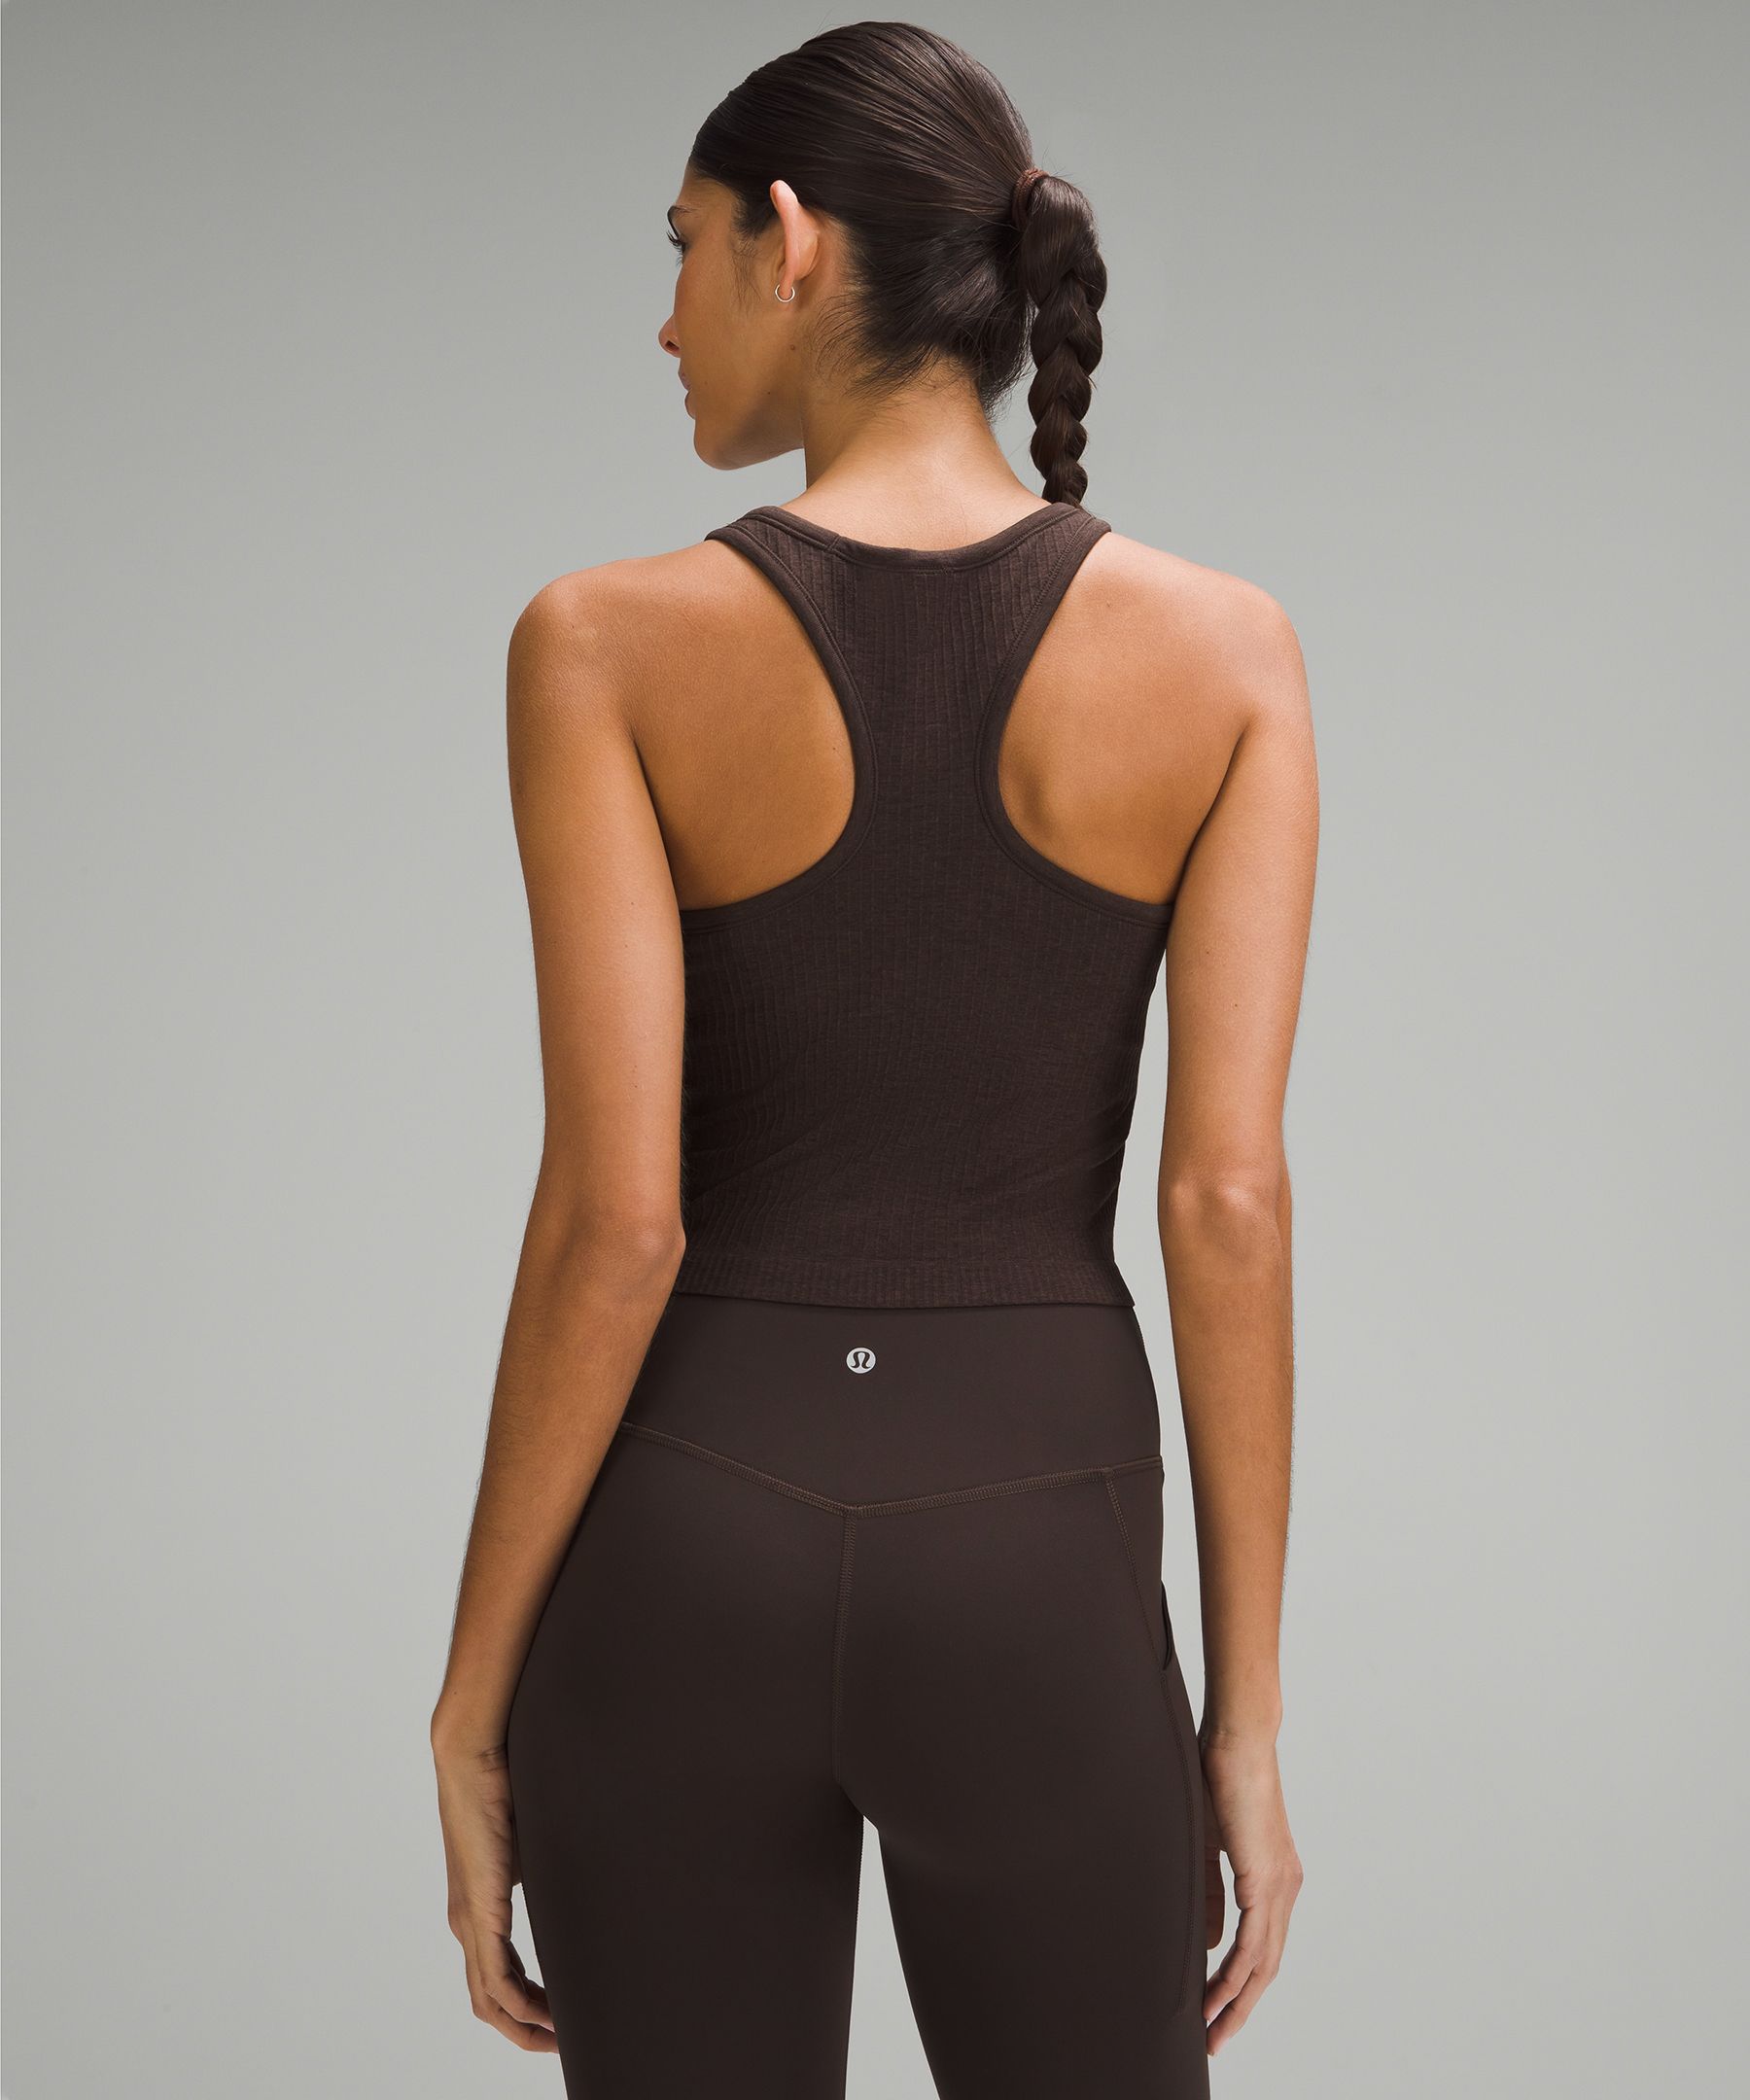 Lululemon Ebb To Street Racerback Crop Tank Size 6 - $80 New With Tags -  From Isabella